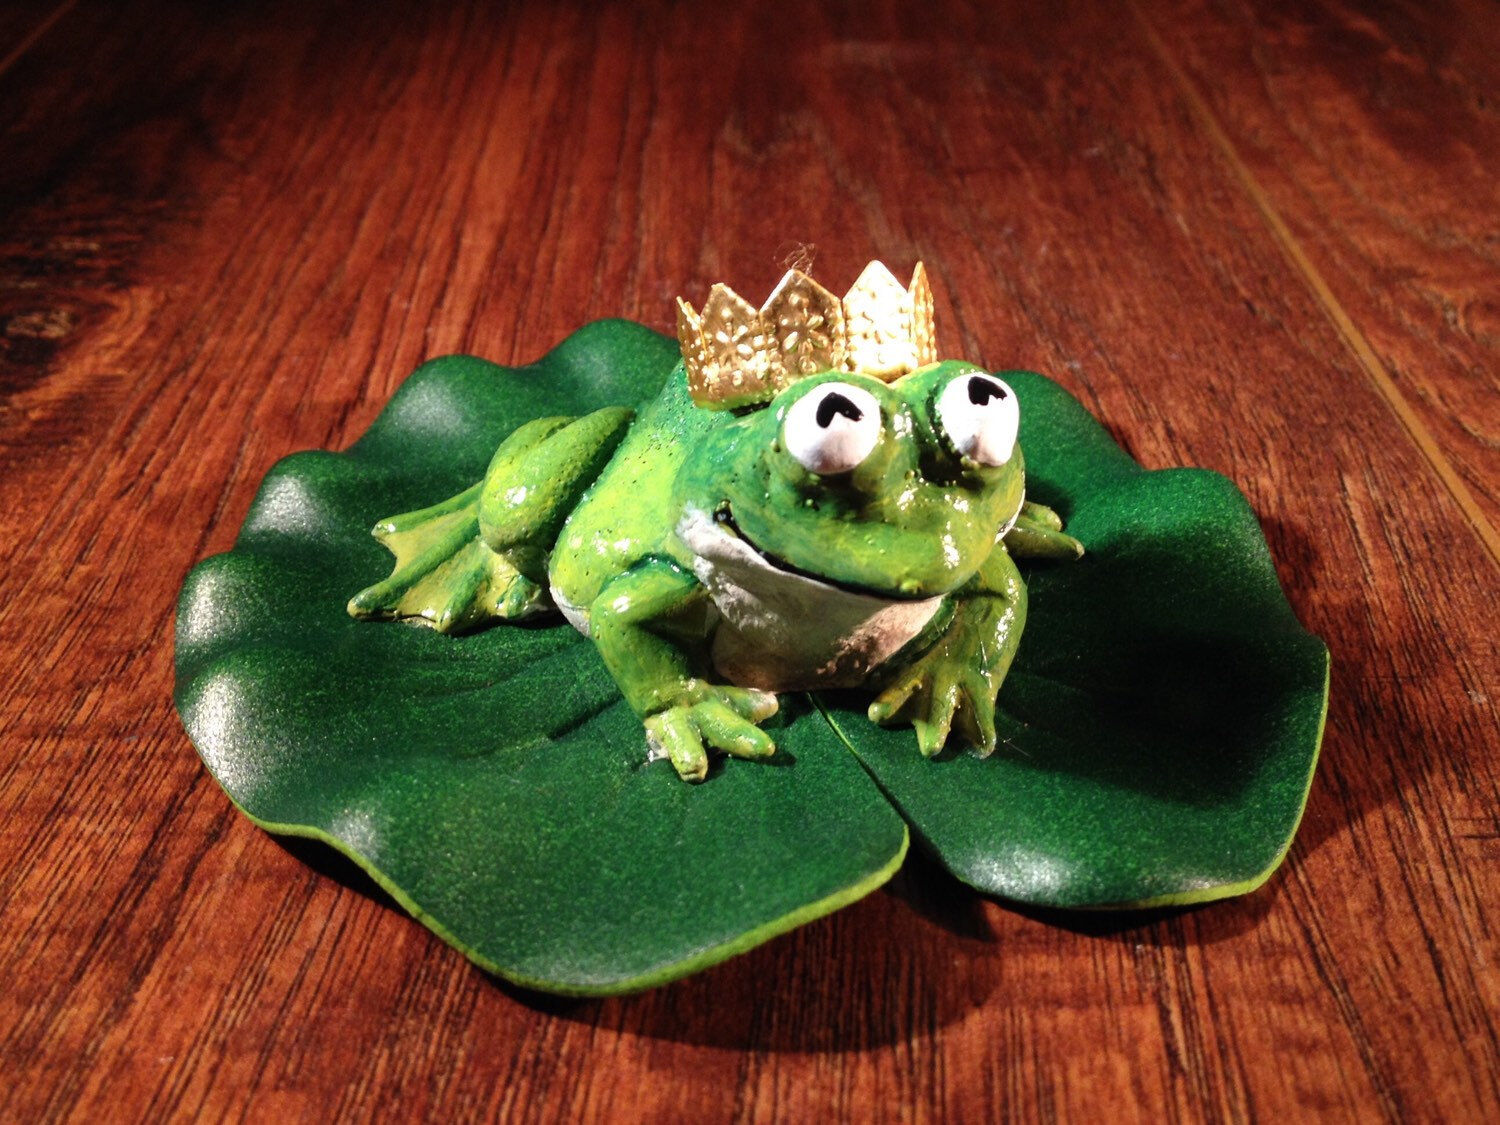 Frog Prince Fairy Garden Miniature Sculpture With A Golden Crown On A Lily Pad